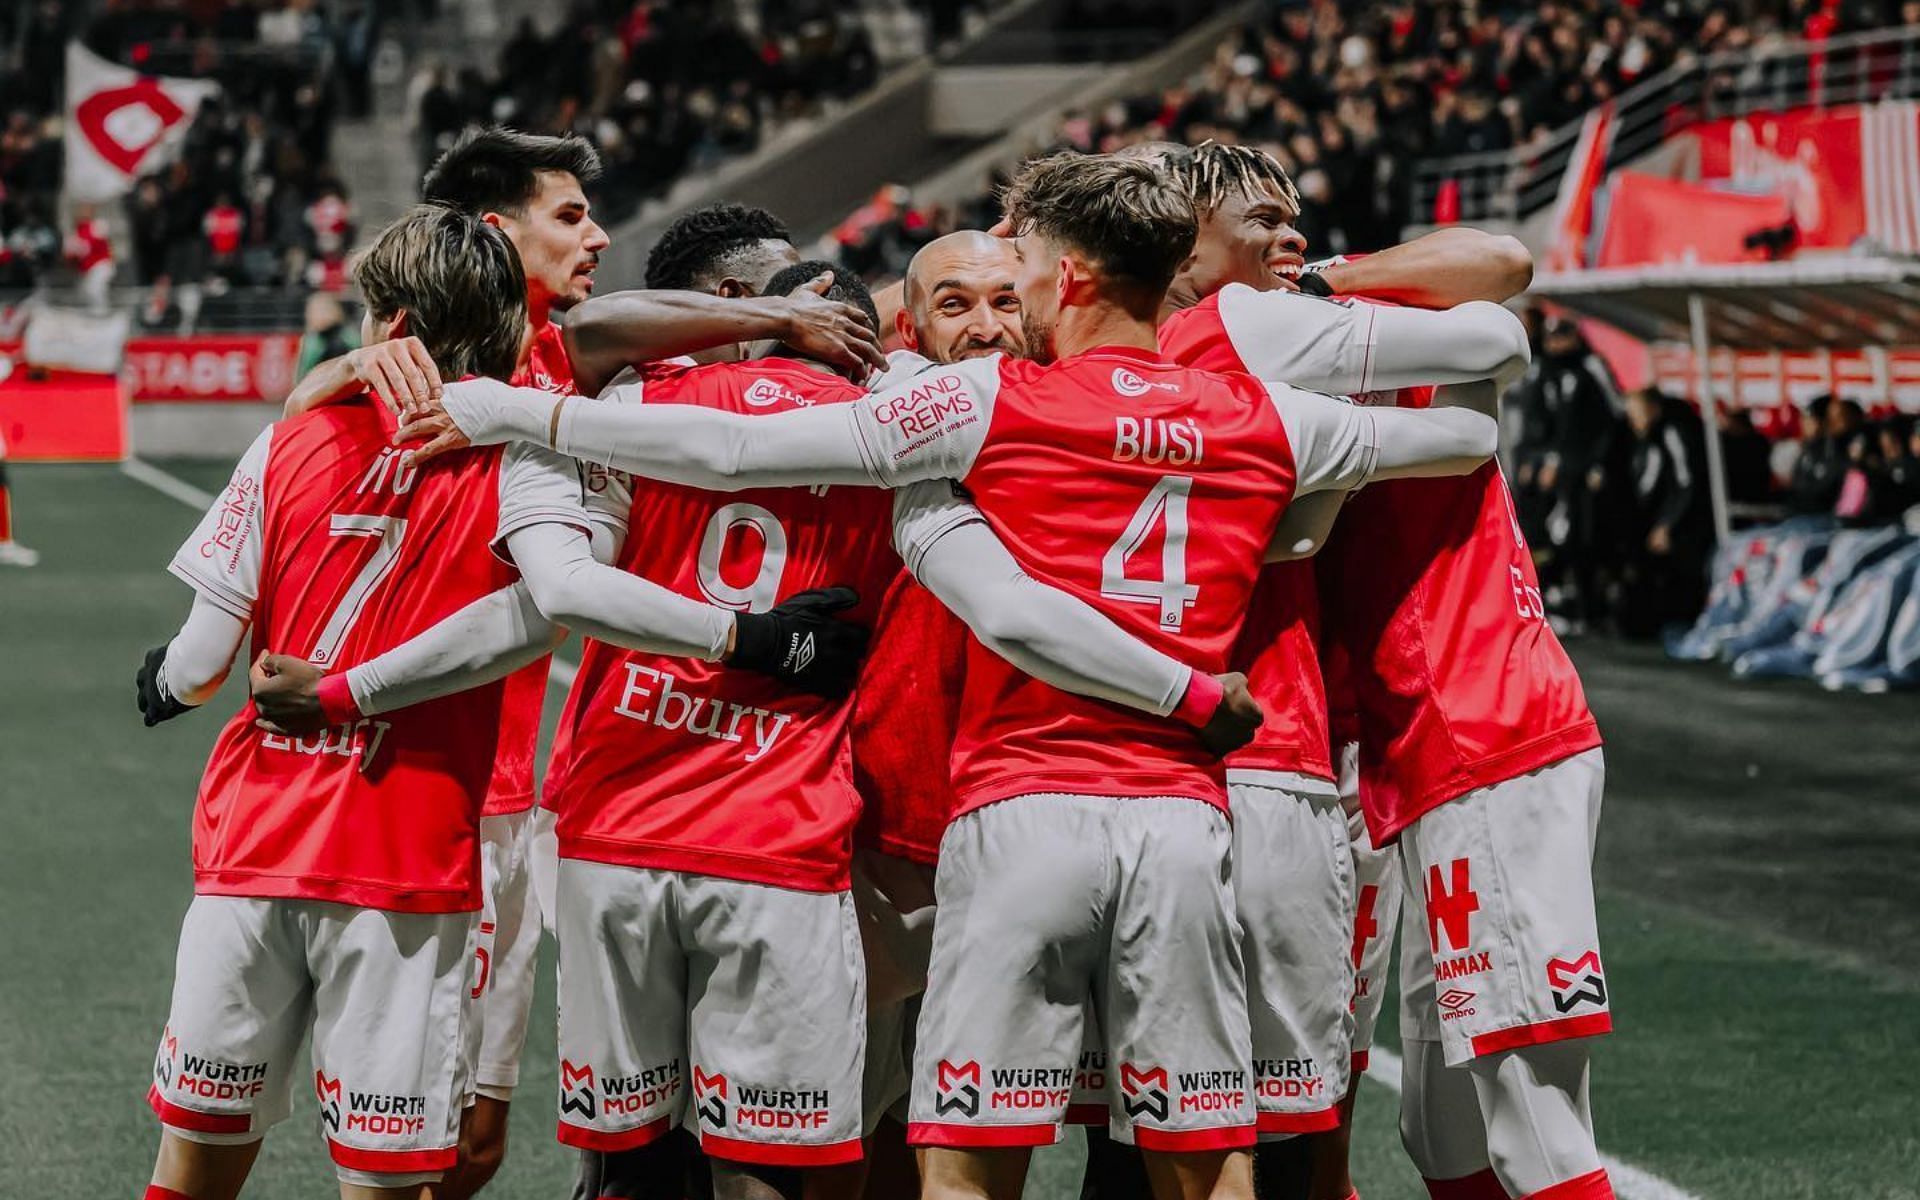 Can Reims defeat strugglers Toulouse this weekend?